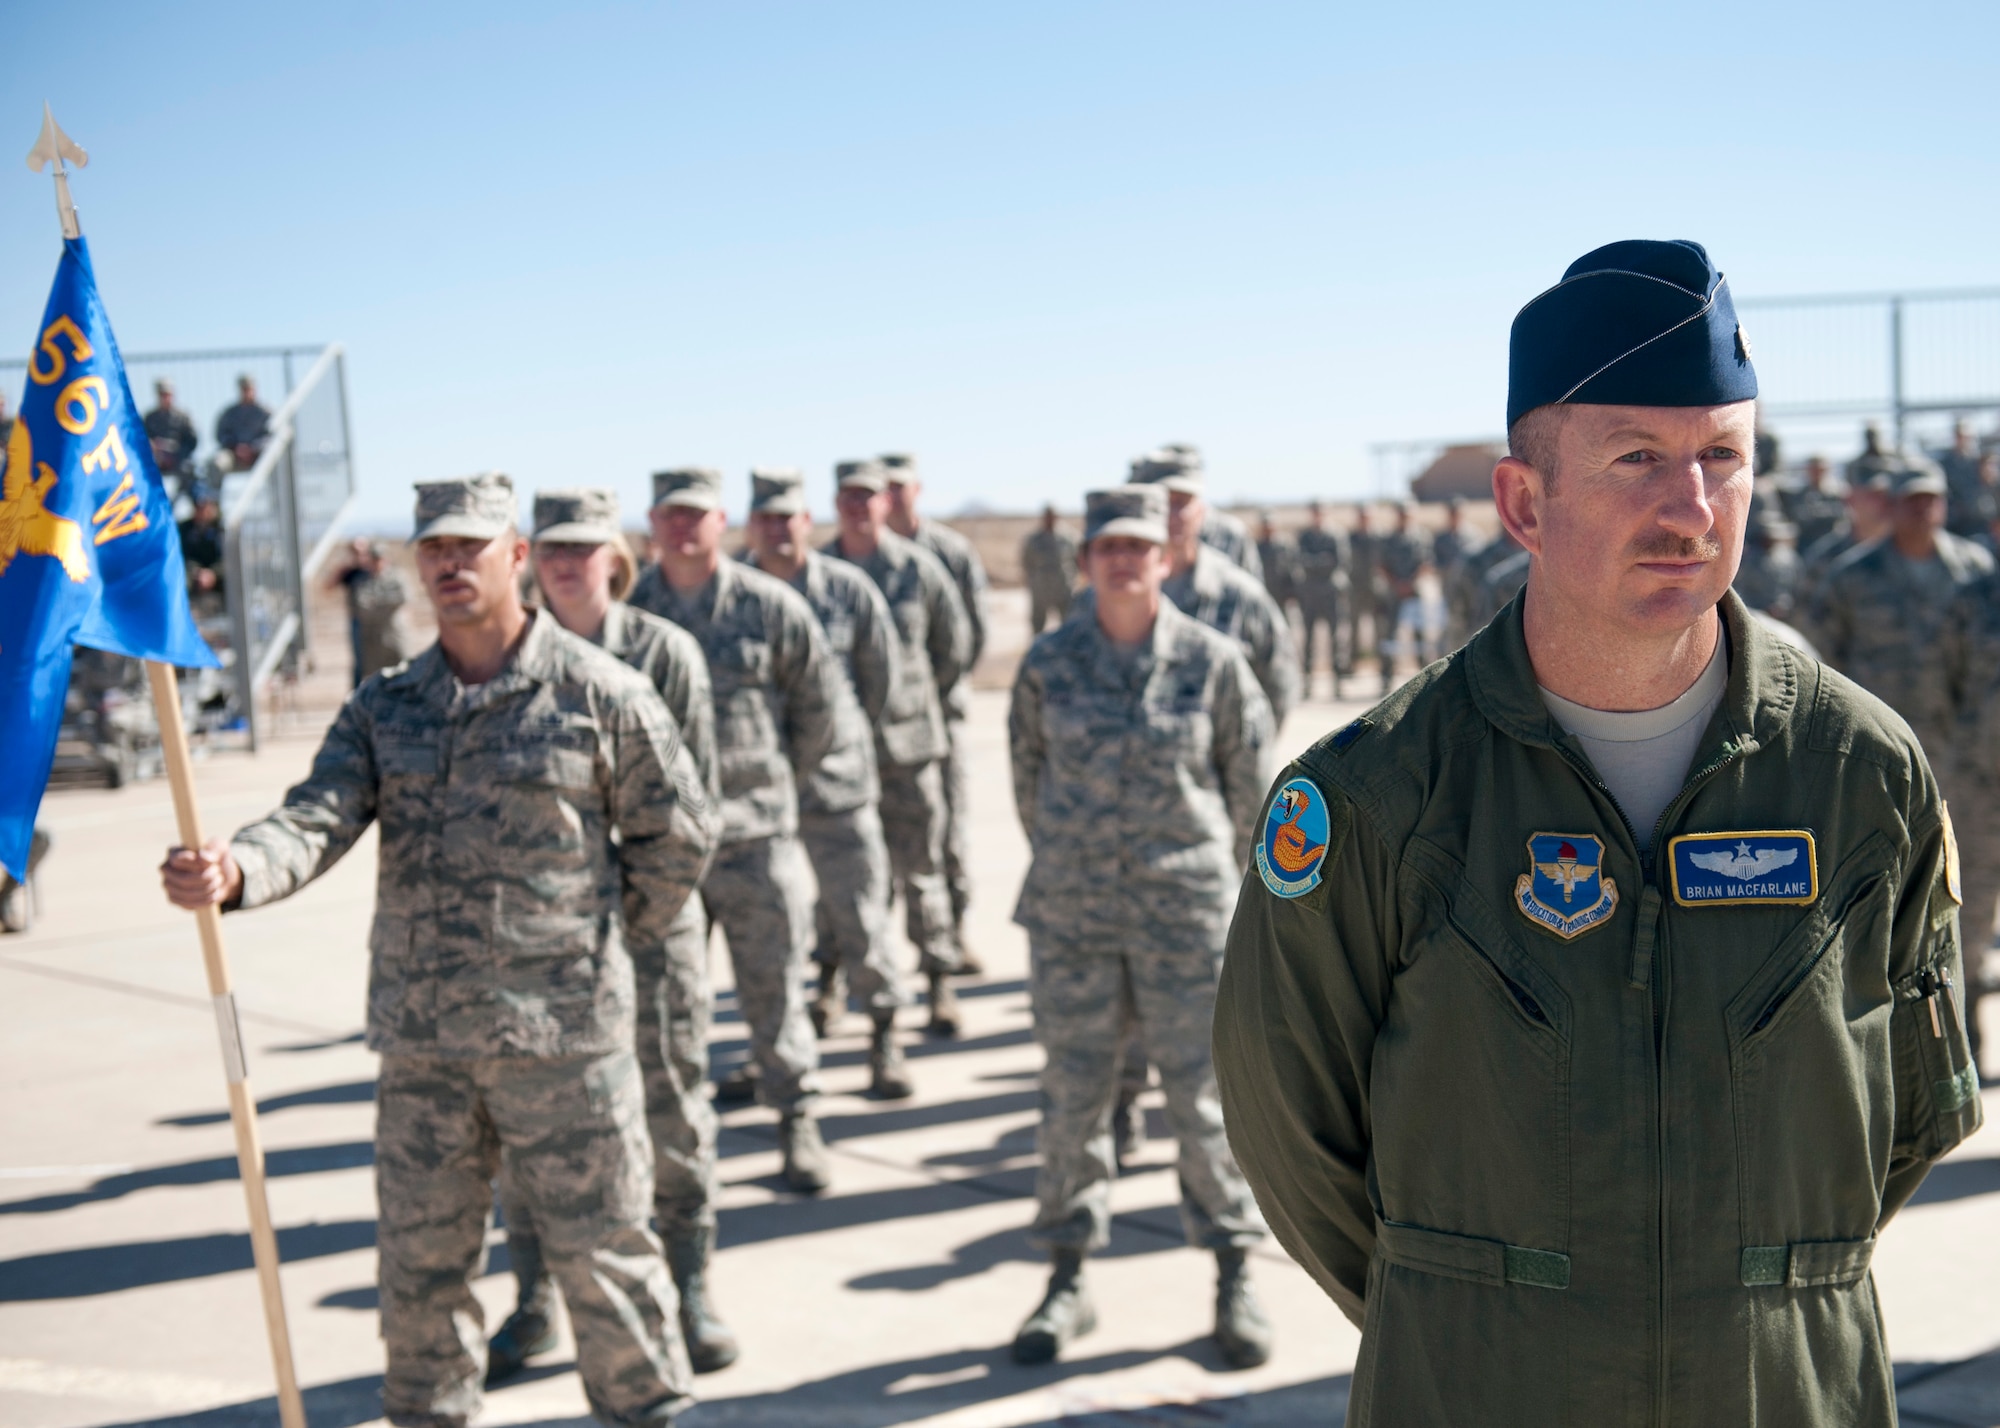 Lieutenant Col. Brian Macfarlane, 54th Operation Support Squadron director of operations, stands in formation with the new Airmen of the 54th Fighter Group at Holloman Air Force Base, N.M., March 11. The 54th Fighter Group, a tenant unit at Holloman, is a detachment the 56th Fighter Wing at Luke Air Force Base, Ariz., and will ultimately operate two F-16 Fighting Falcon aircraft training squadrons. The 54th Fighter Group plus three squadrons were activated at the ceremony: the 311th Fighter Squadron, the 54th Operations Support Squadron and the 54th Aircraft Maintenance Squadron. (U.S. Air Force photo by Senior Airman Daniel E. Liddicoet/Released)